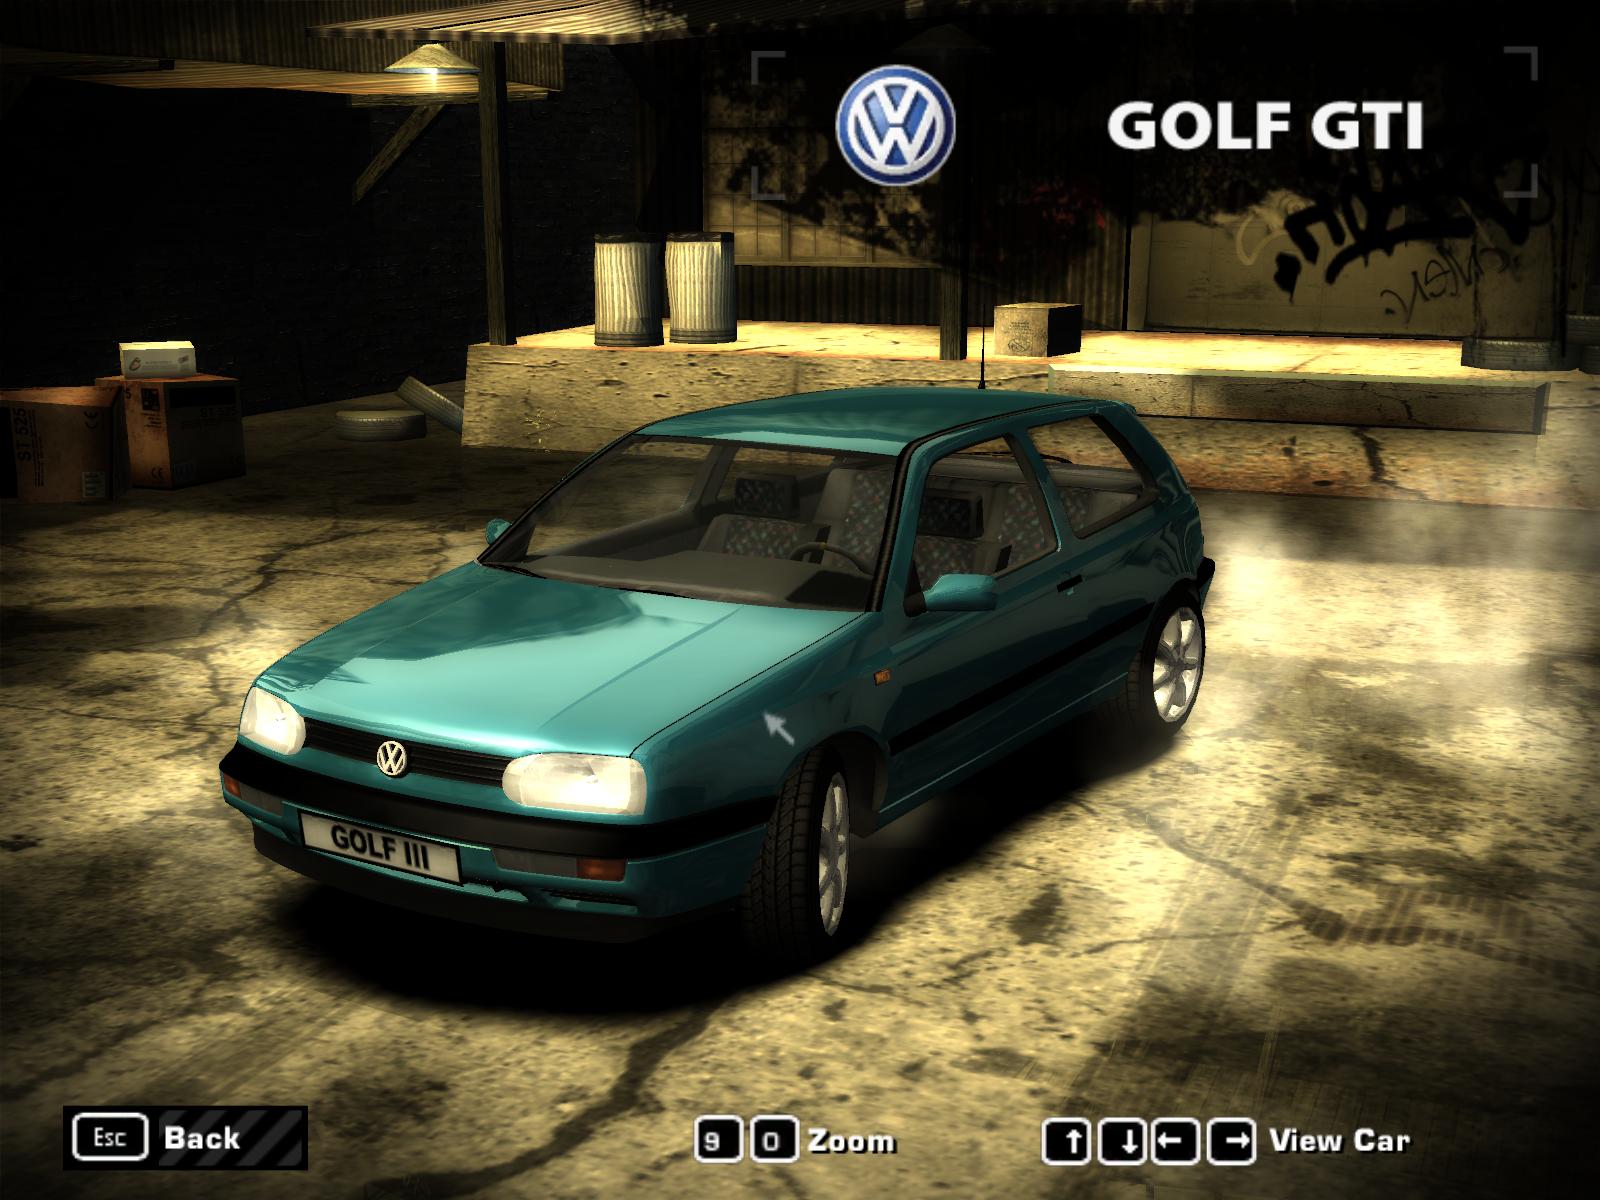 Need For Speed Most Wanted 1991 Volkswagen Golf III